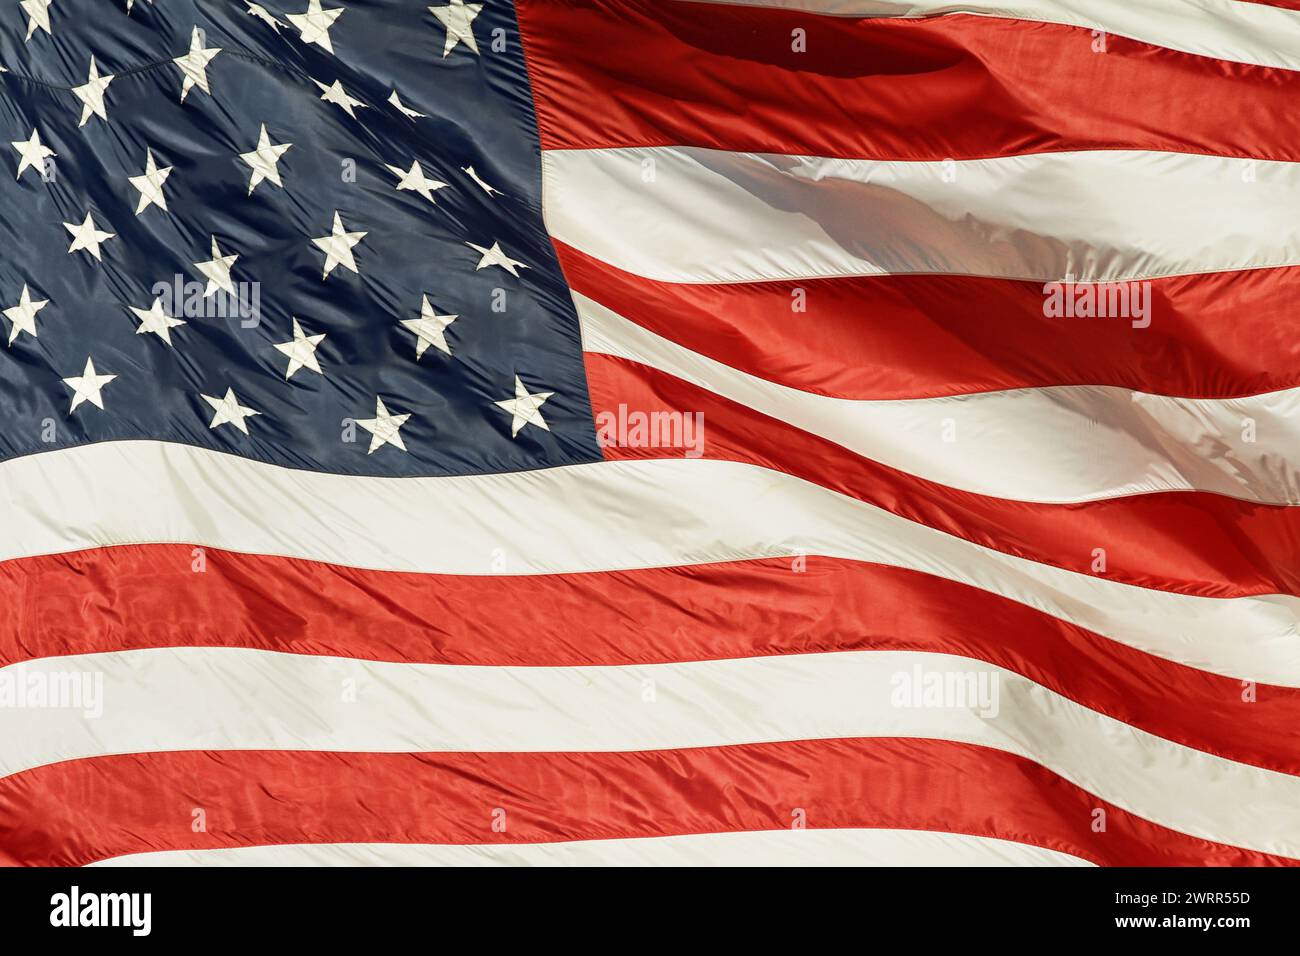 Star, stripes and American flag with symbol, graphic or illustration on banner, theme or abstract background. Waving icon of country heritage or glory Stock Photo